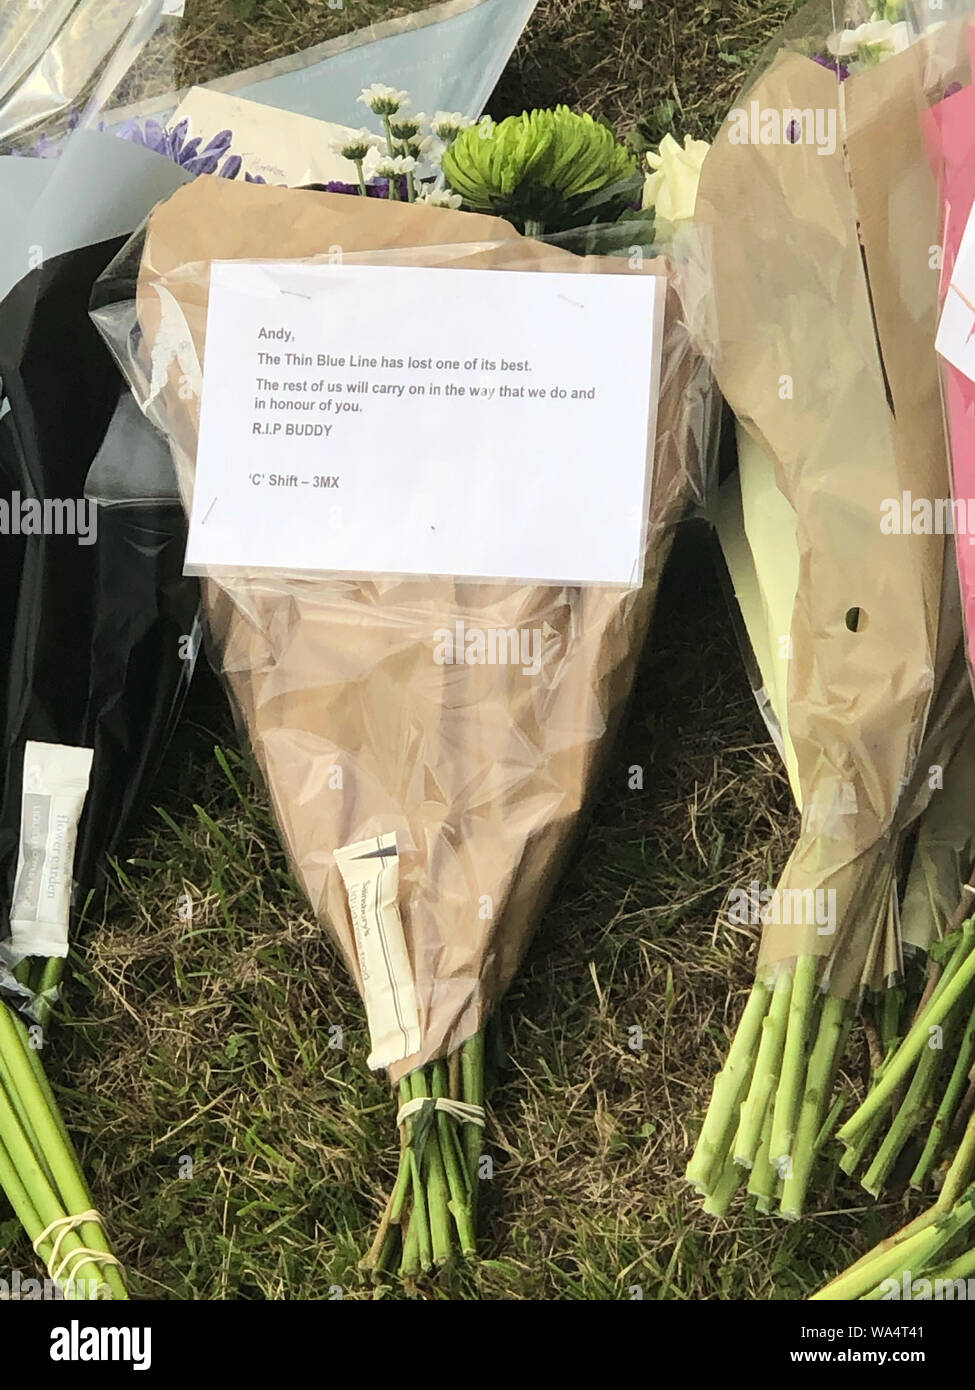 Floral tributes left at the scene in Ufton Lane, where Thames Valley Police officer Pc Andrew Harper, 28, died following a 'serious incident' at about 11.30pm on Thursday near the A4 Bath Road, between Reading and Newbury, at the village of Sulhamstead in Berkshire. Stock Photo